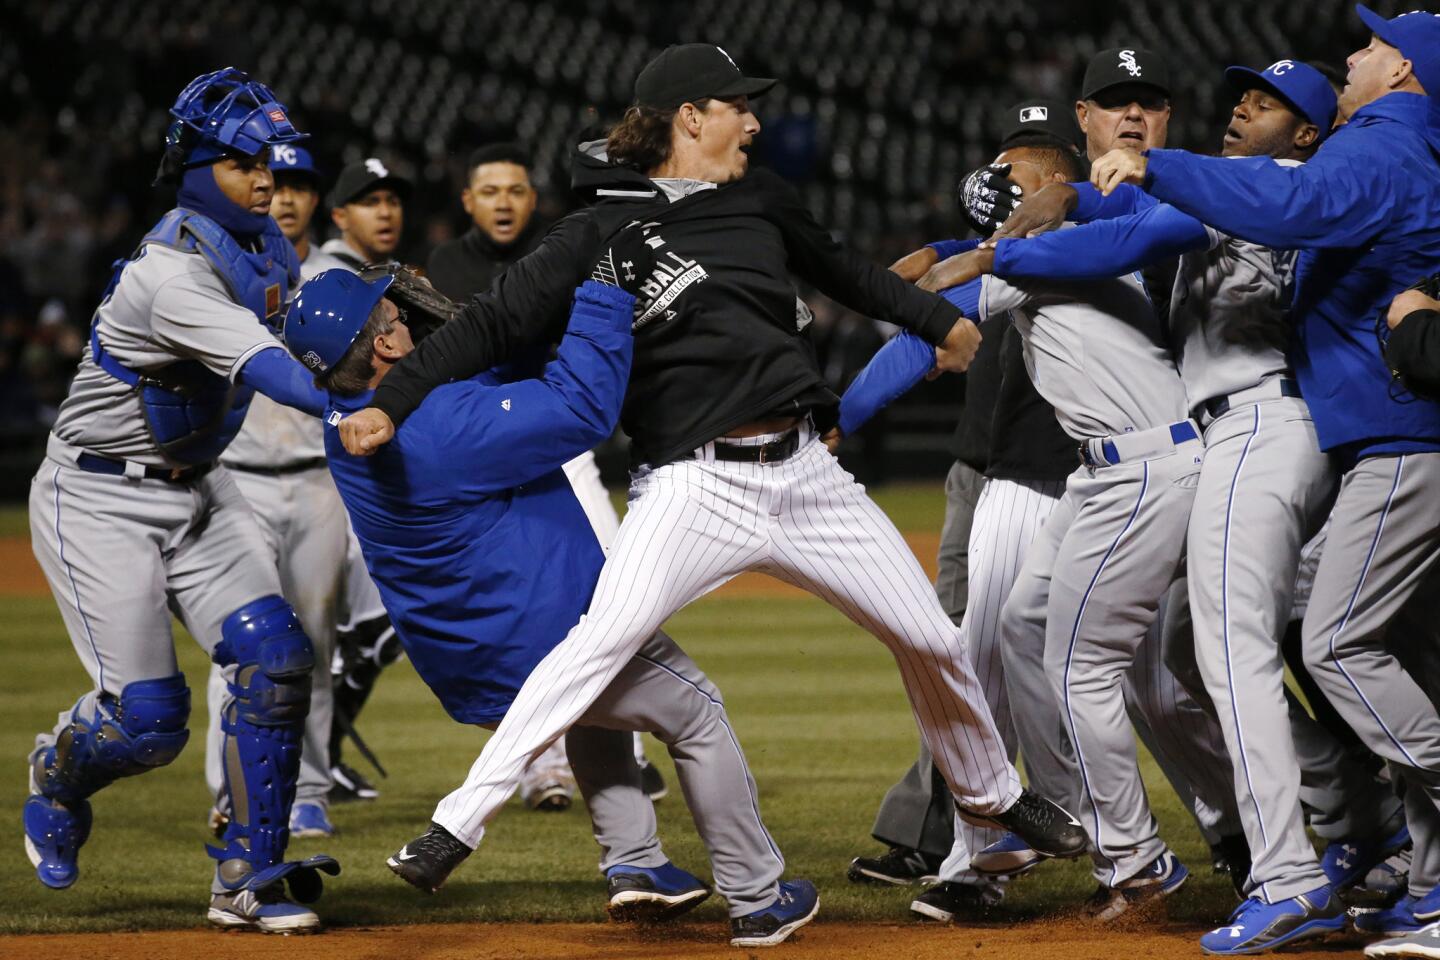 Jeff Samardzija fights with Royals players during the seventh inning.